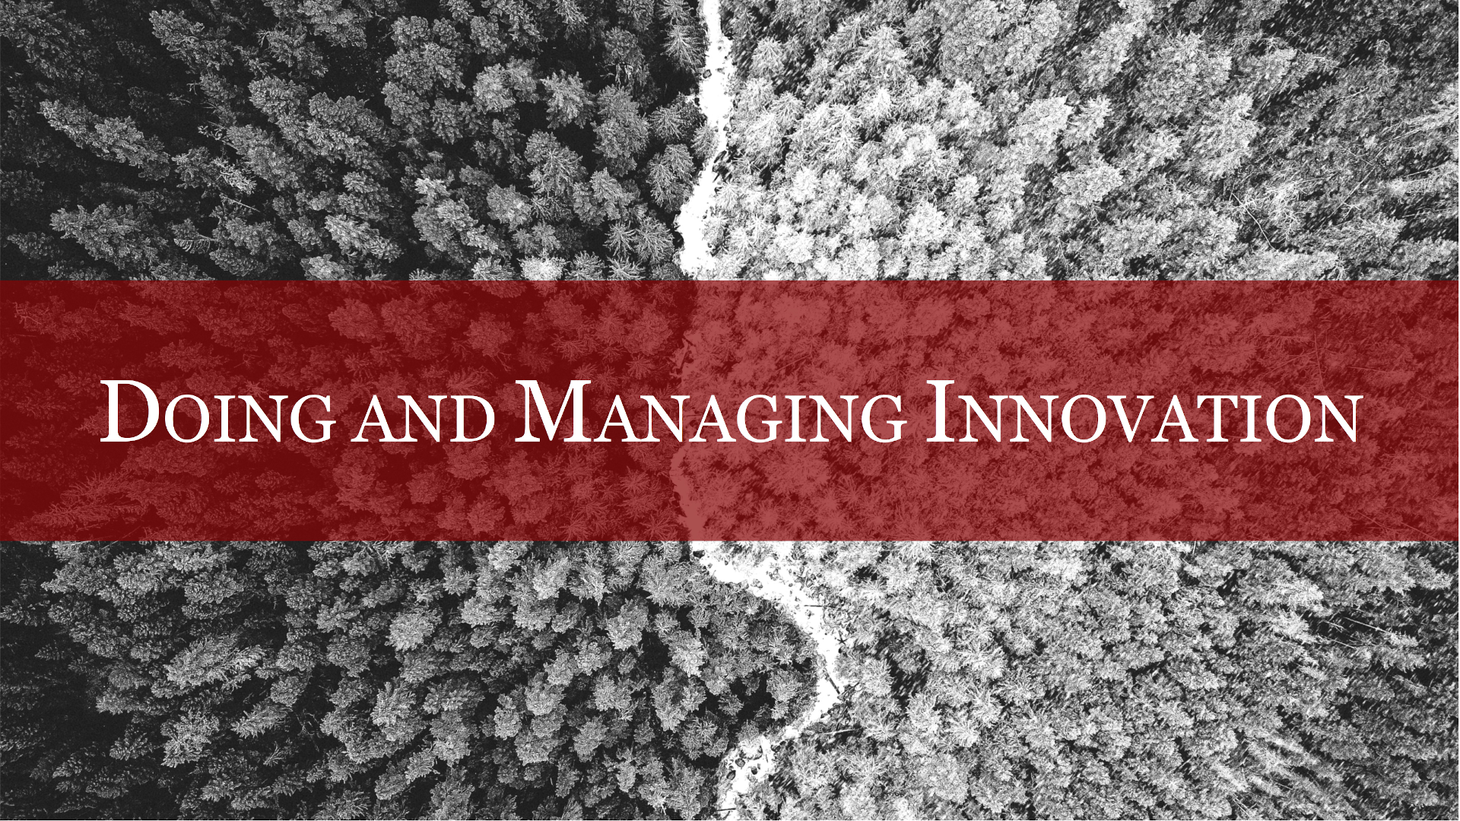 Doing and managing innovation